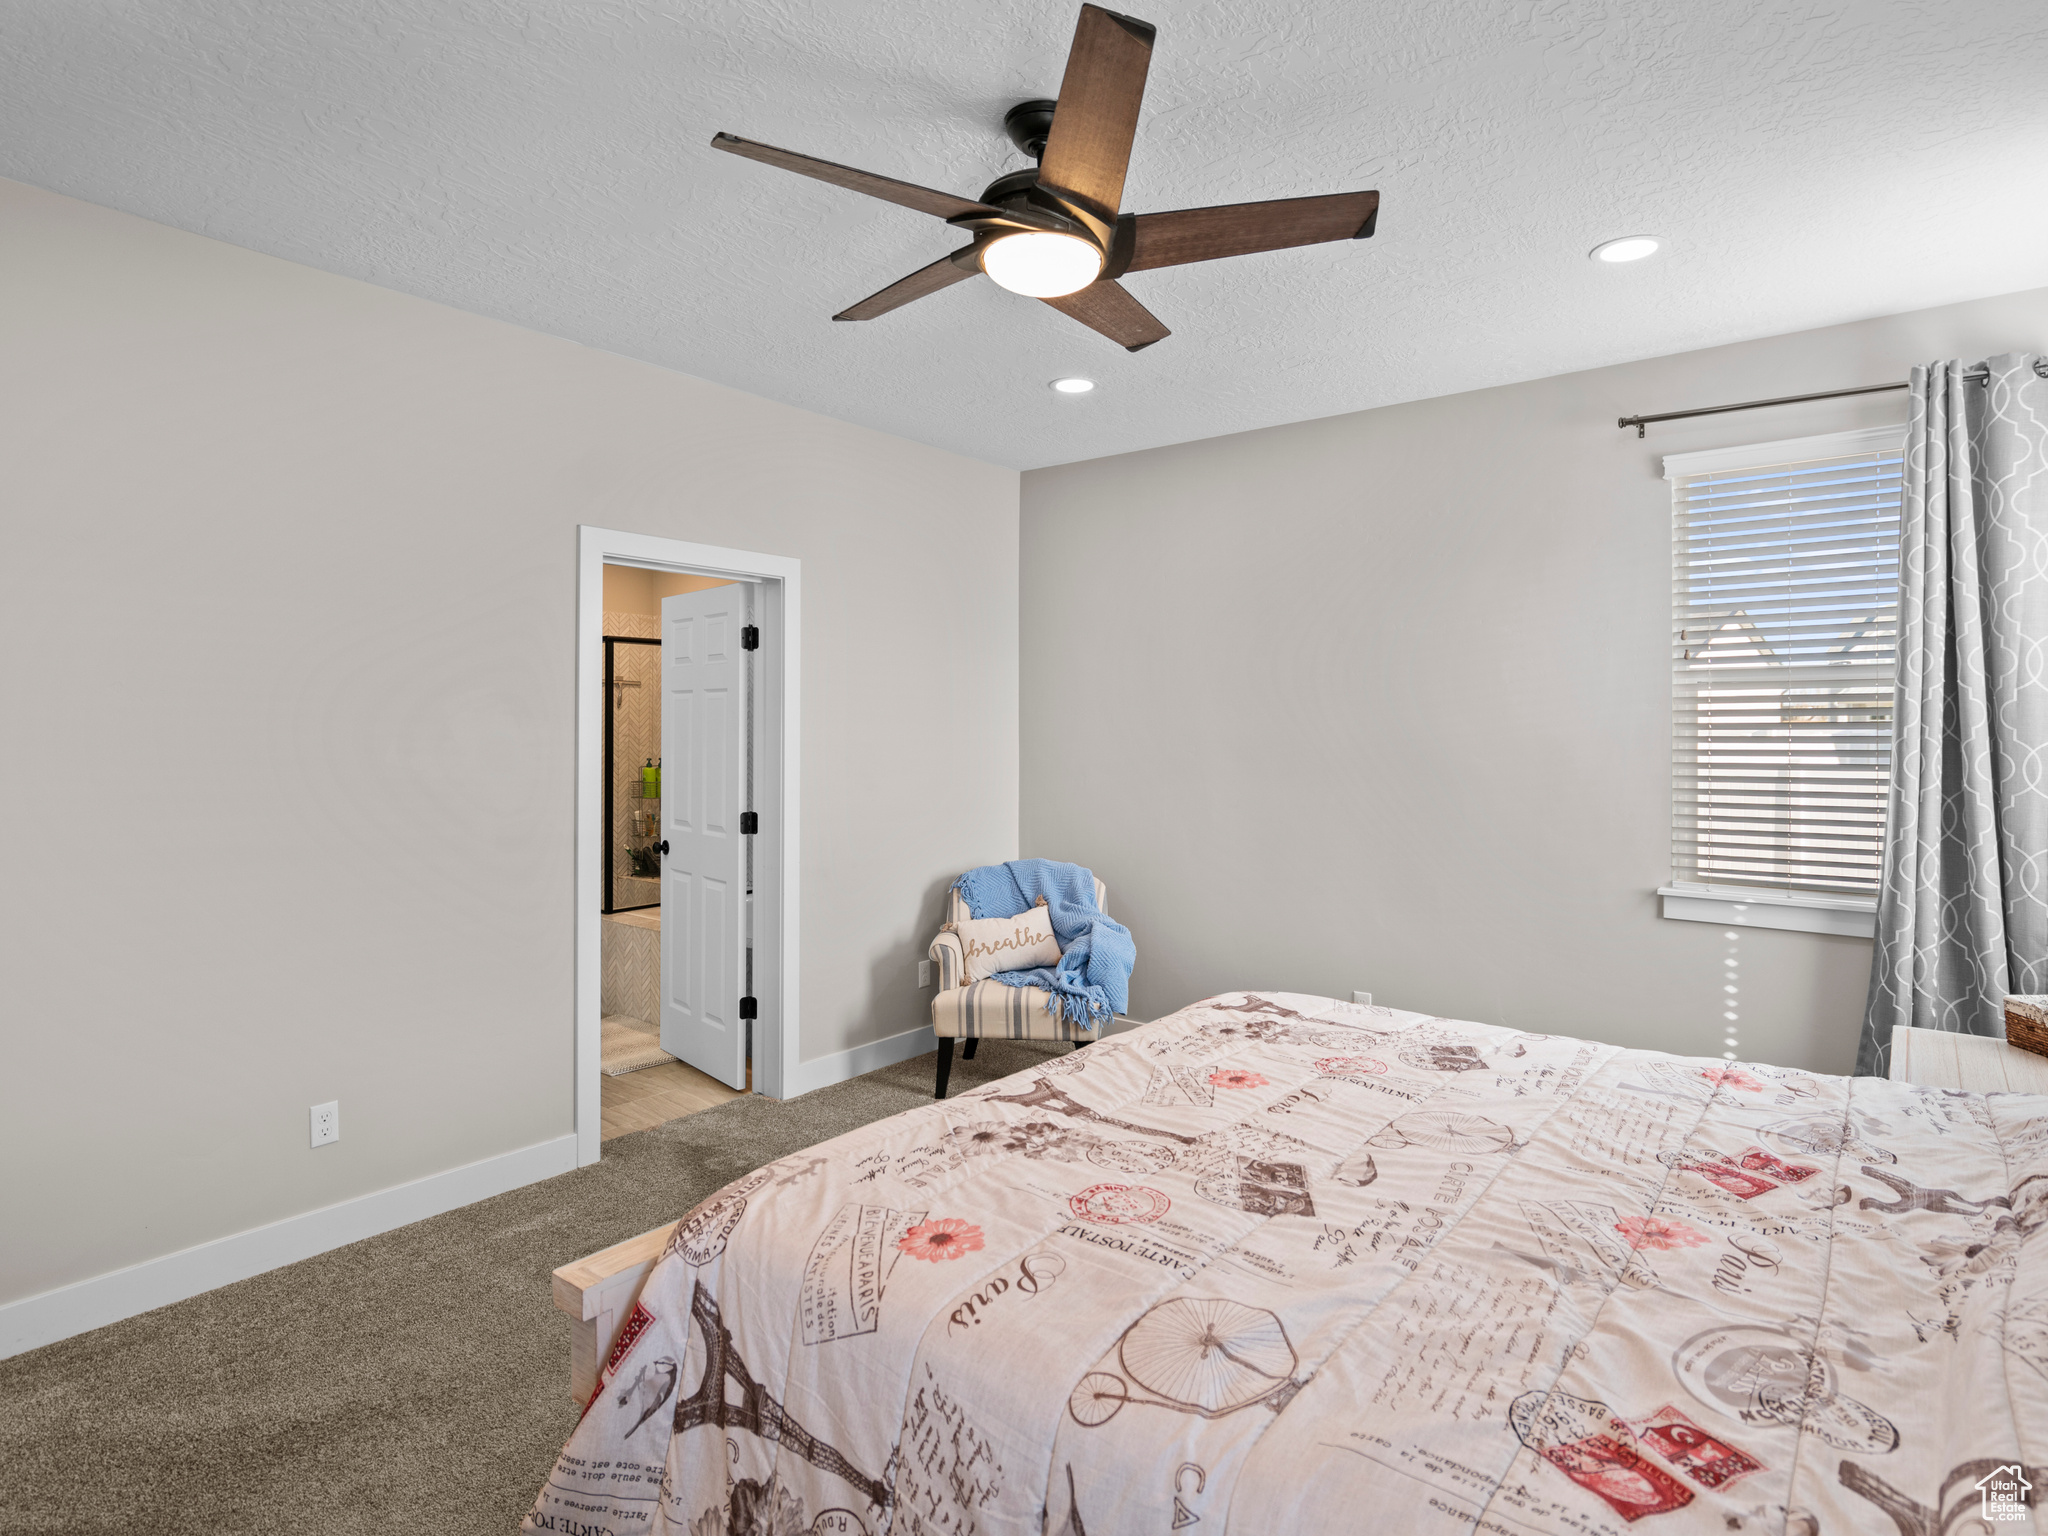 Carpeted bedroom with a textured ceiling, ceiling fan, and connected bathroom